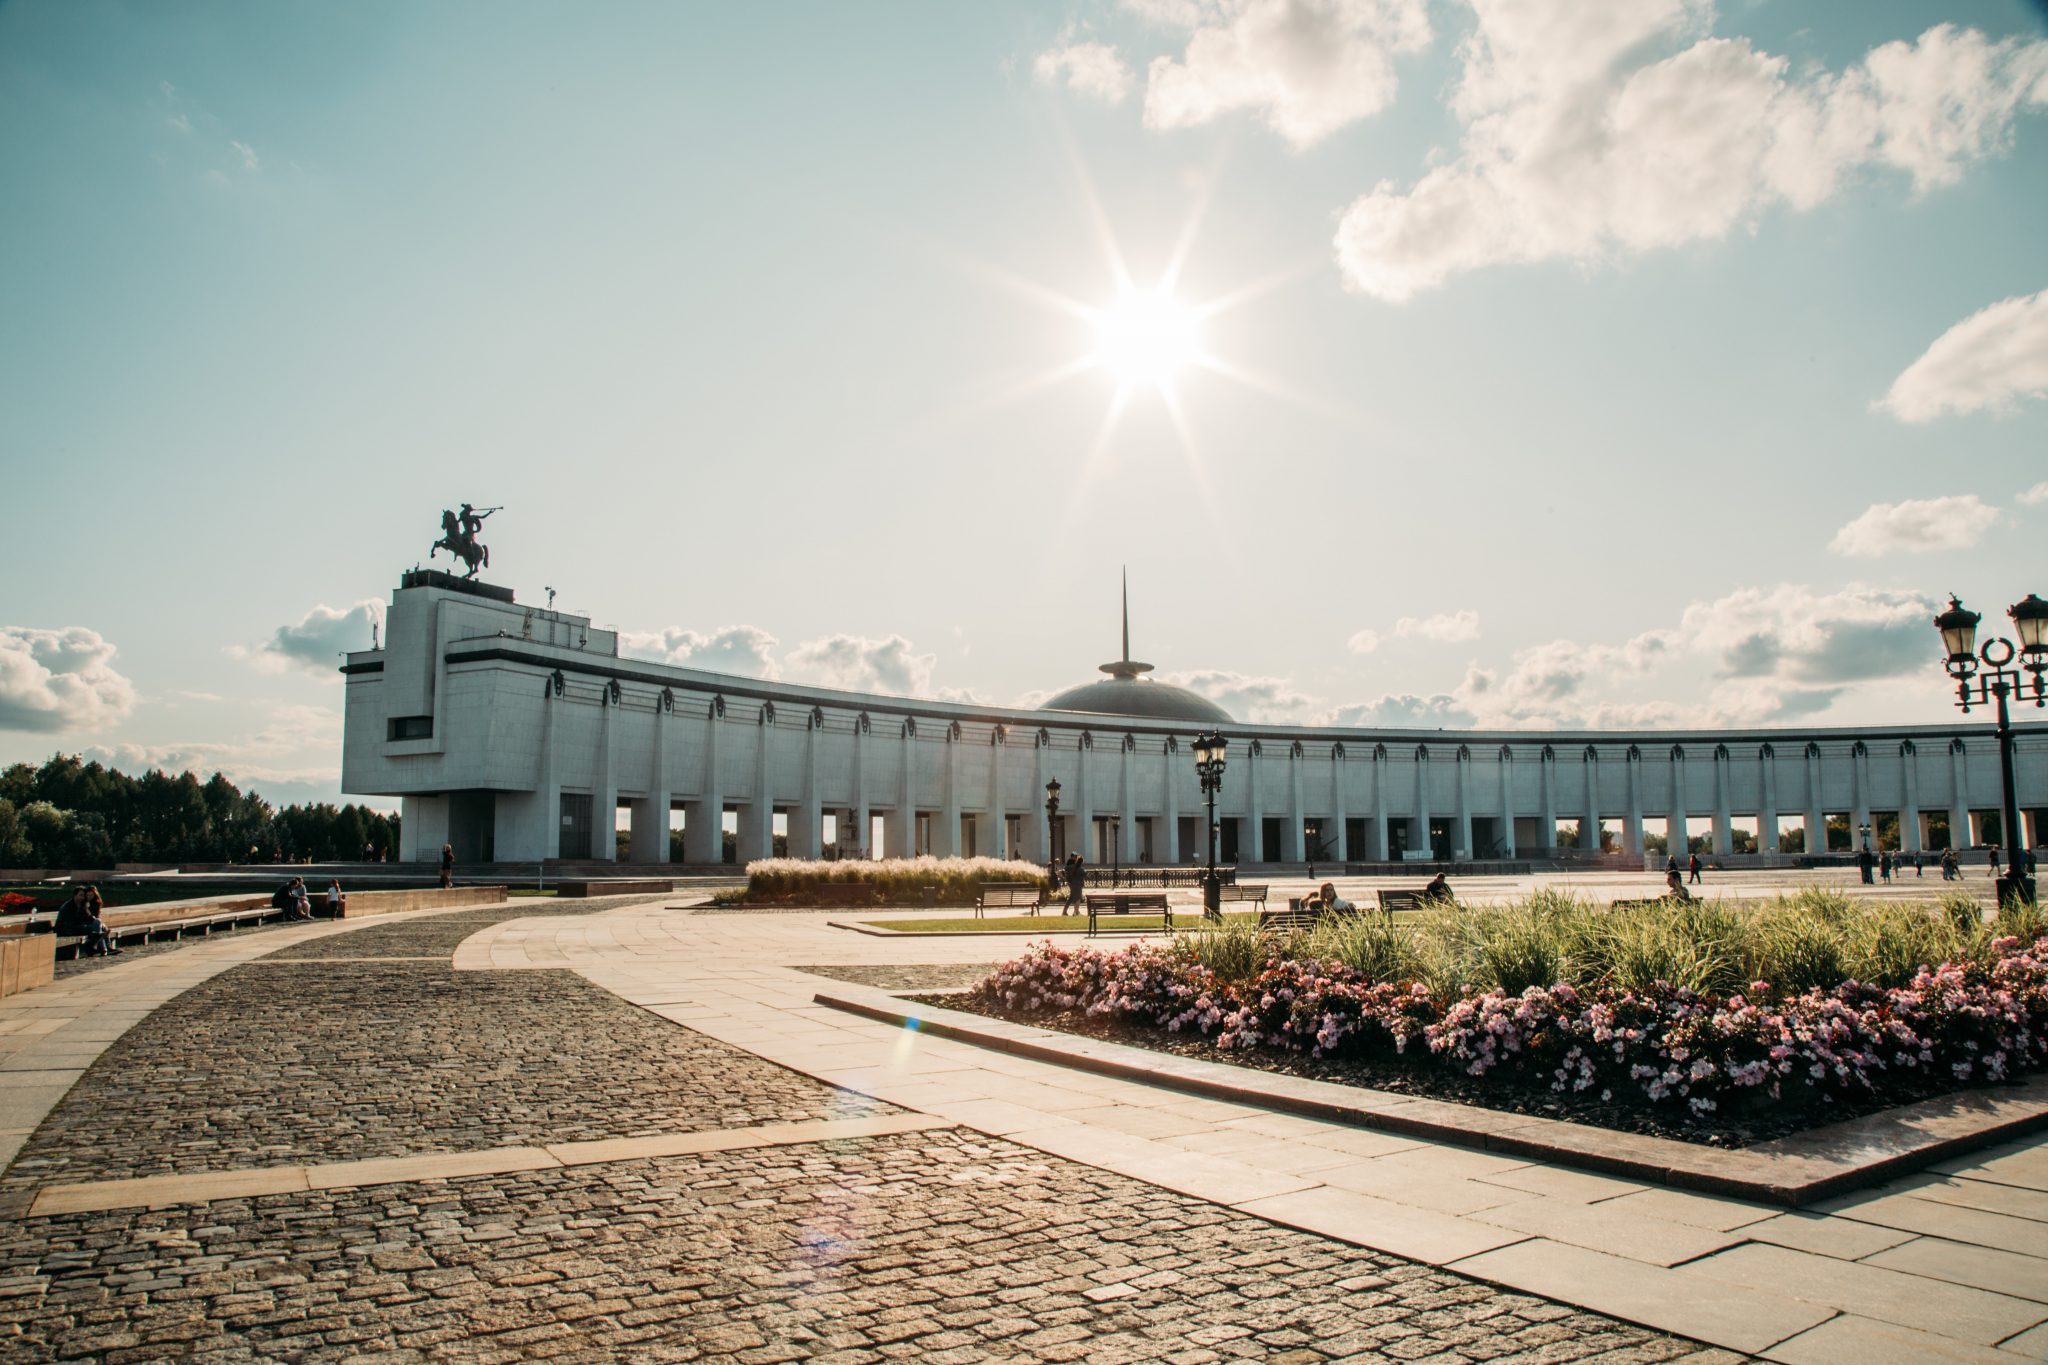 Victory Park (Park Pobedy) in Moscow, Russia – a Guide for First-Time Visitors